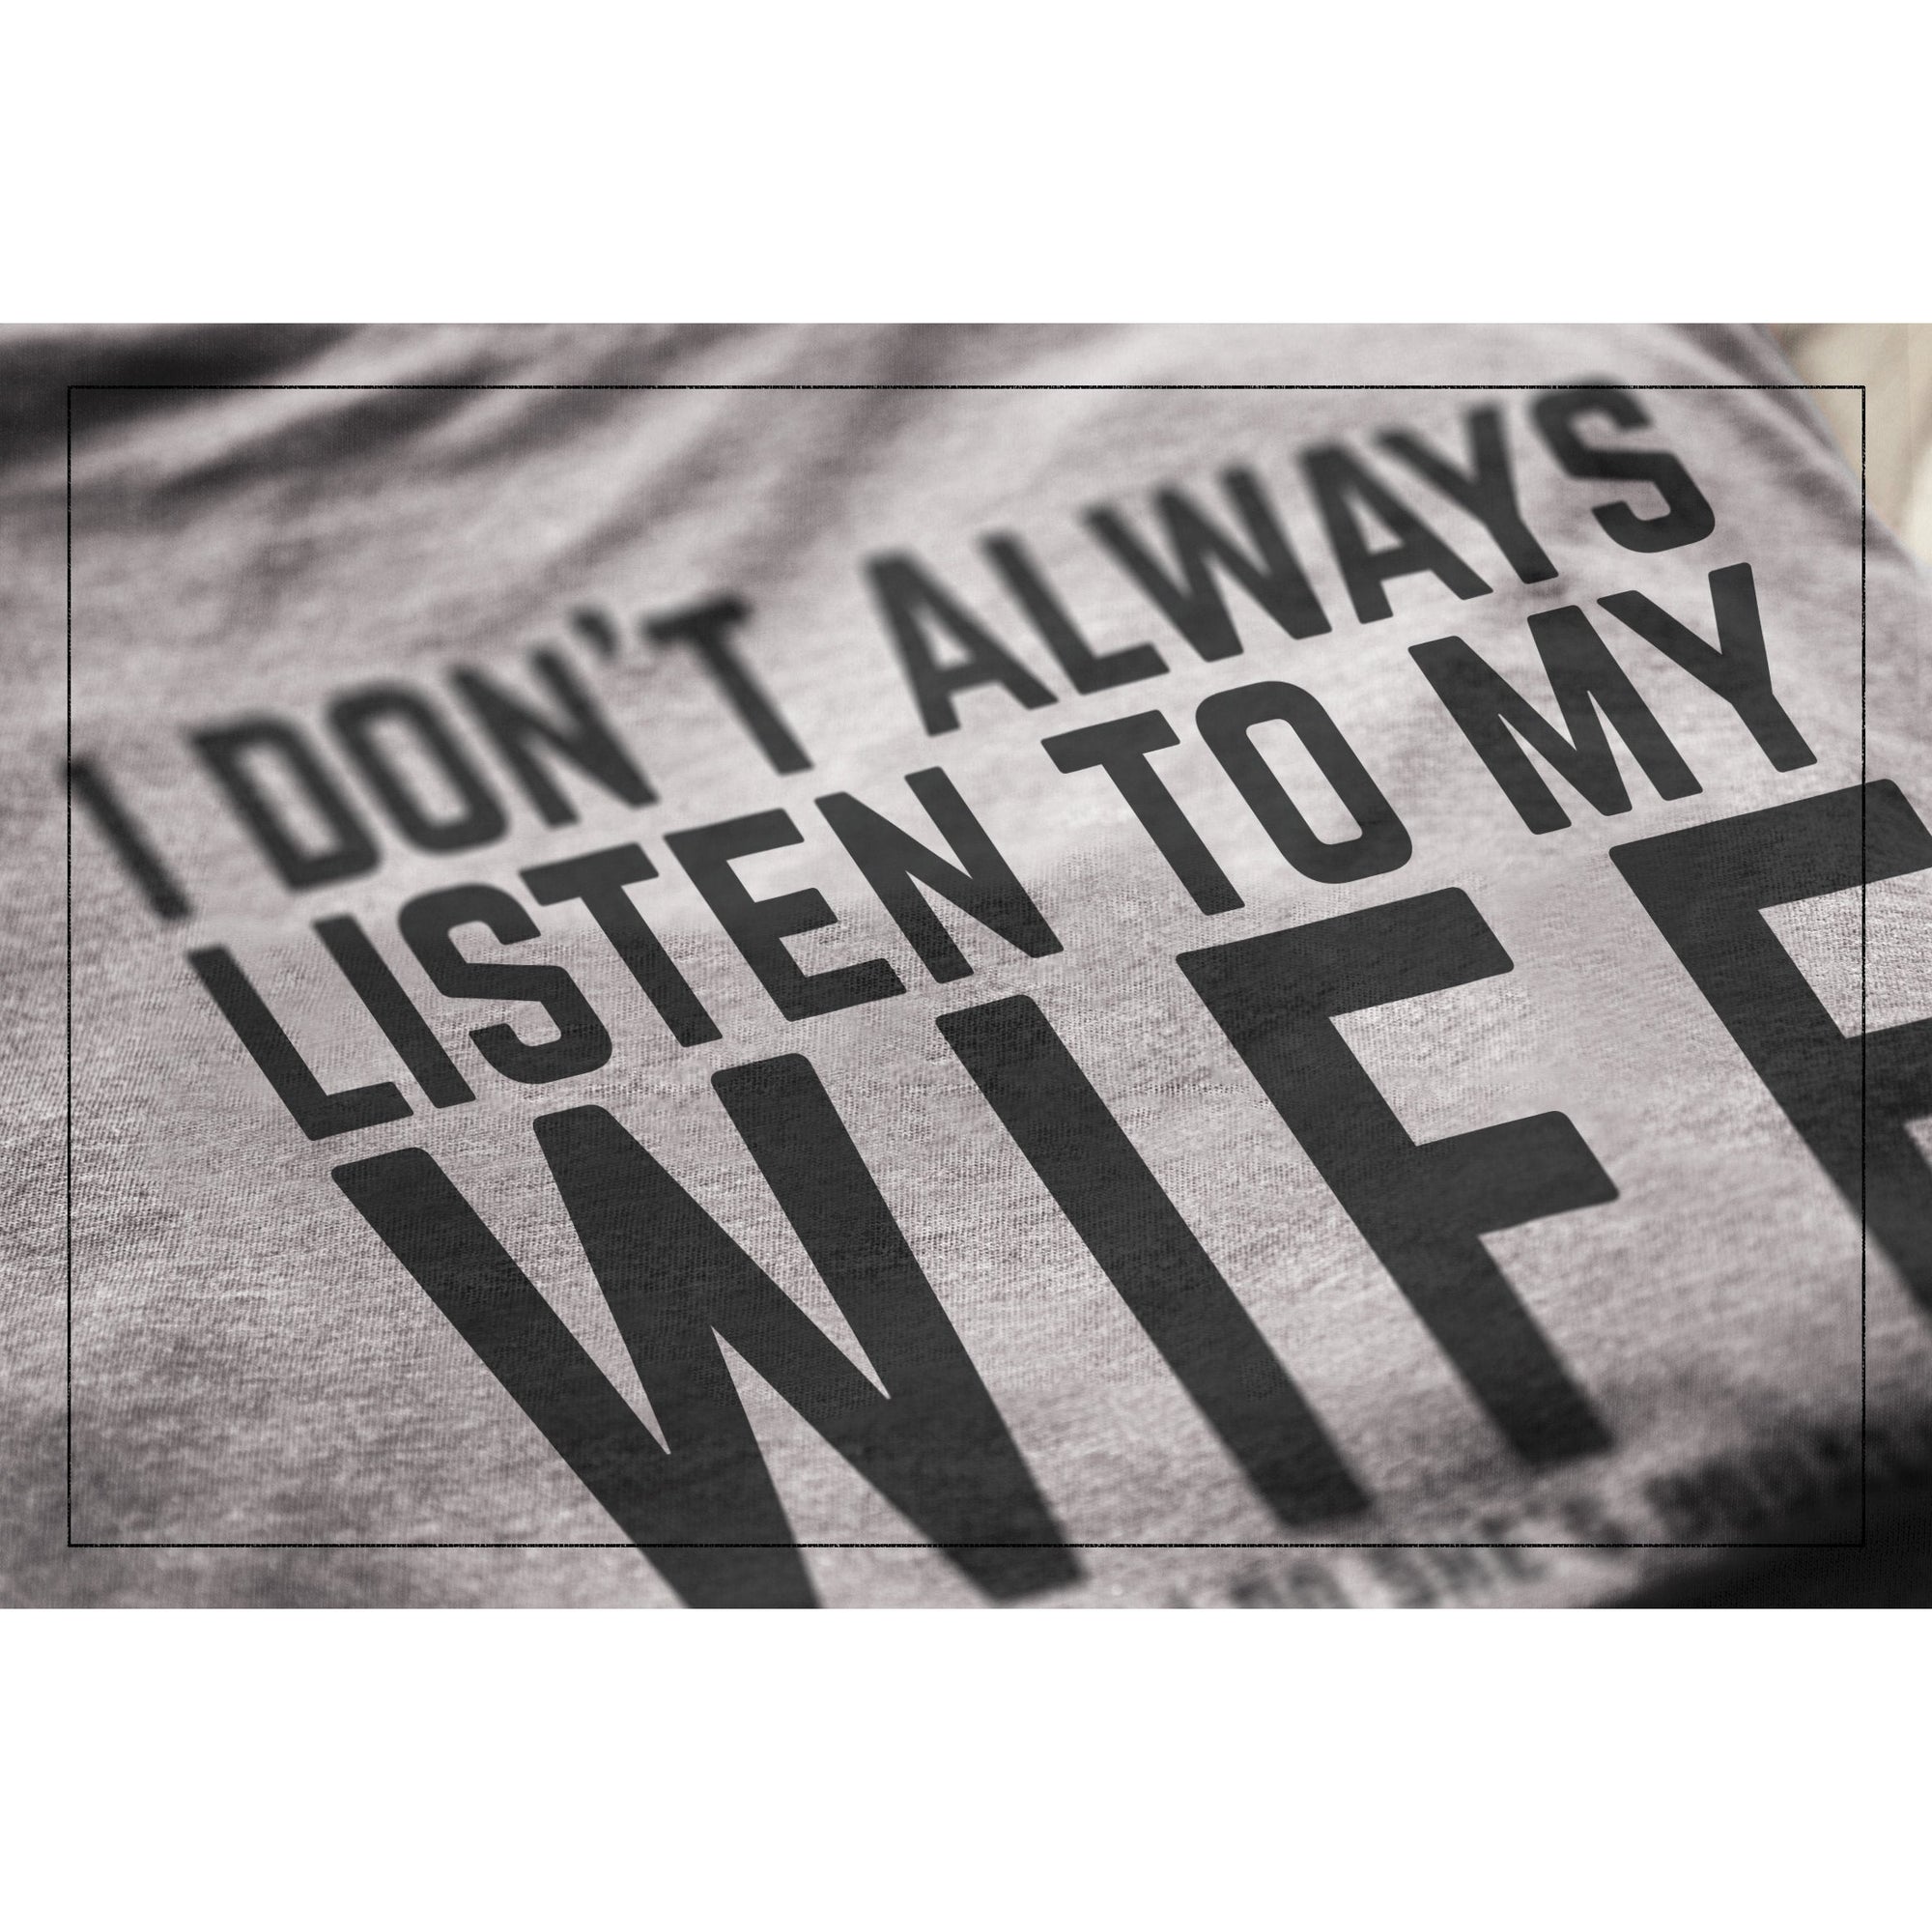 I Don't Always Listen To My Wife But When I Do She's Usually Right